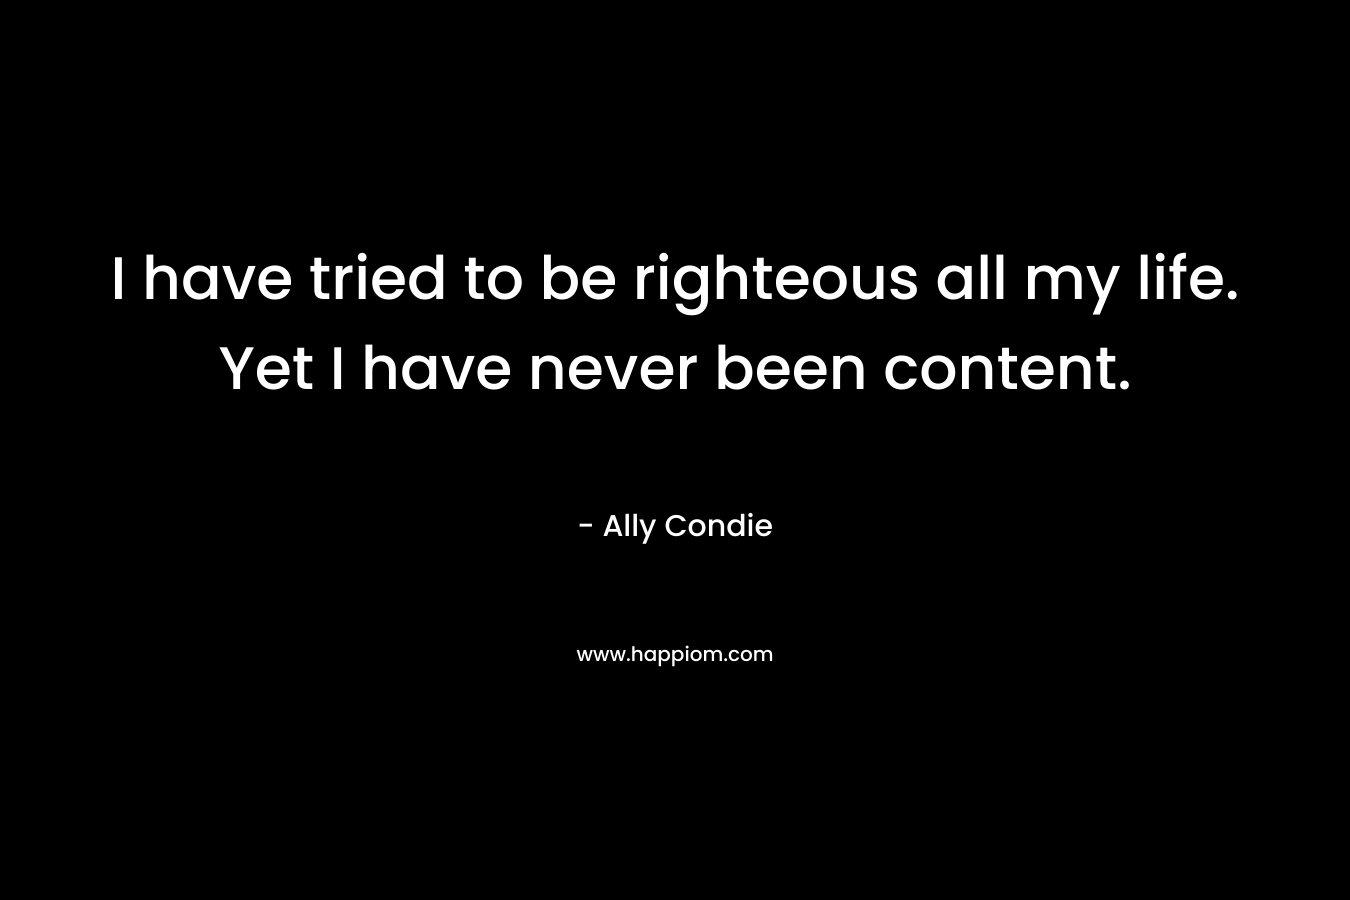 I have tried to be righteous all my life. Yet I have never been content. – Ally Condie